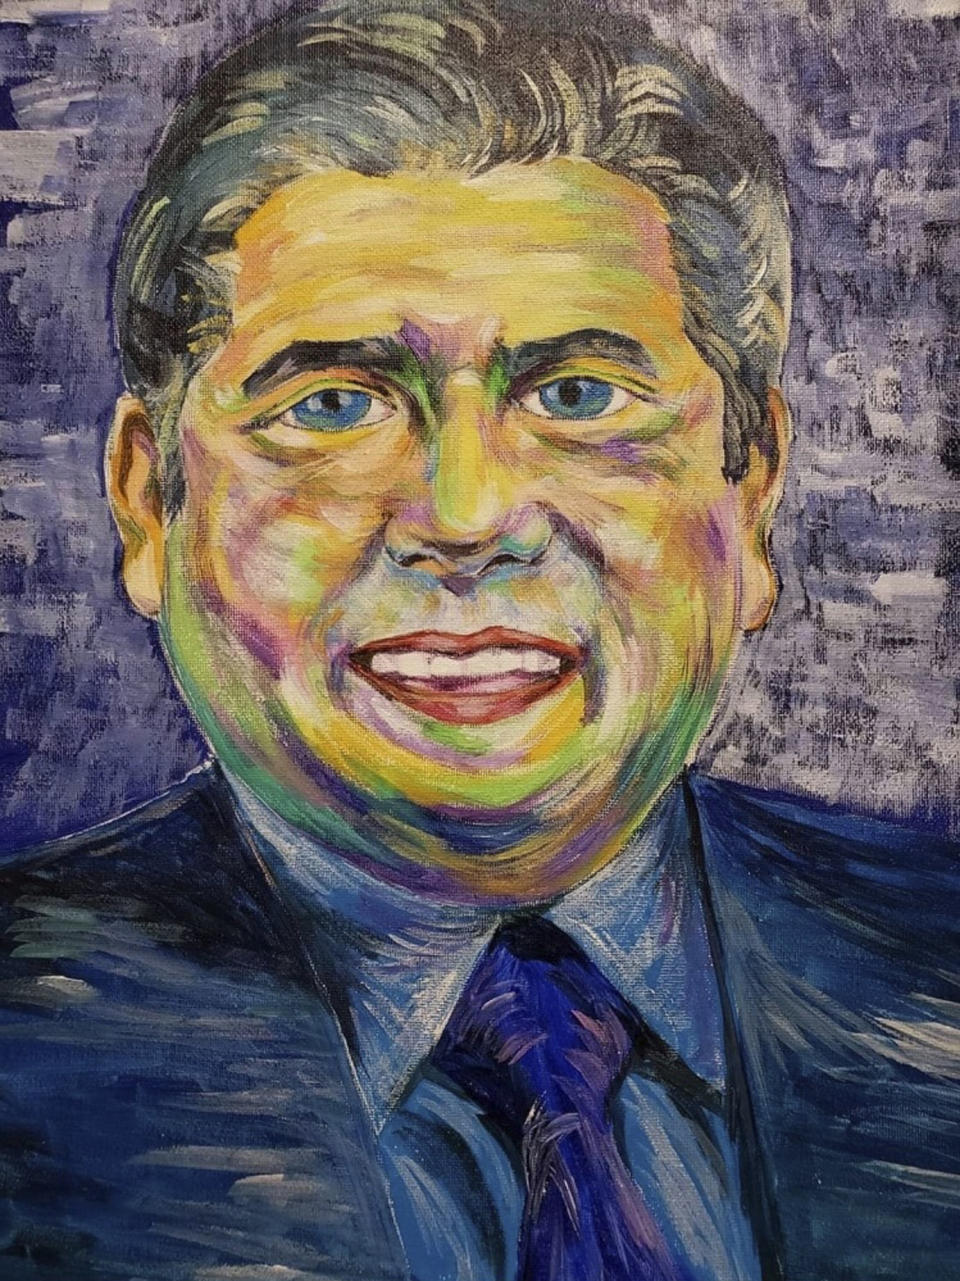 This photo provided by SeungRi “Victoria” Park shows their painting of Illinois Gov. J.B. Pritzker, entitled “2:30 p.m. Man,” created during the COVID-19 pandemic. Park, a Chicago schoolteacher and artist, sent the painting to Pritzker as a gift. (SeungRi “Victoria” Park via AP)